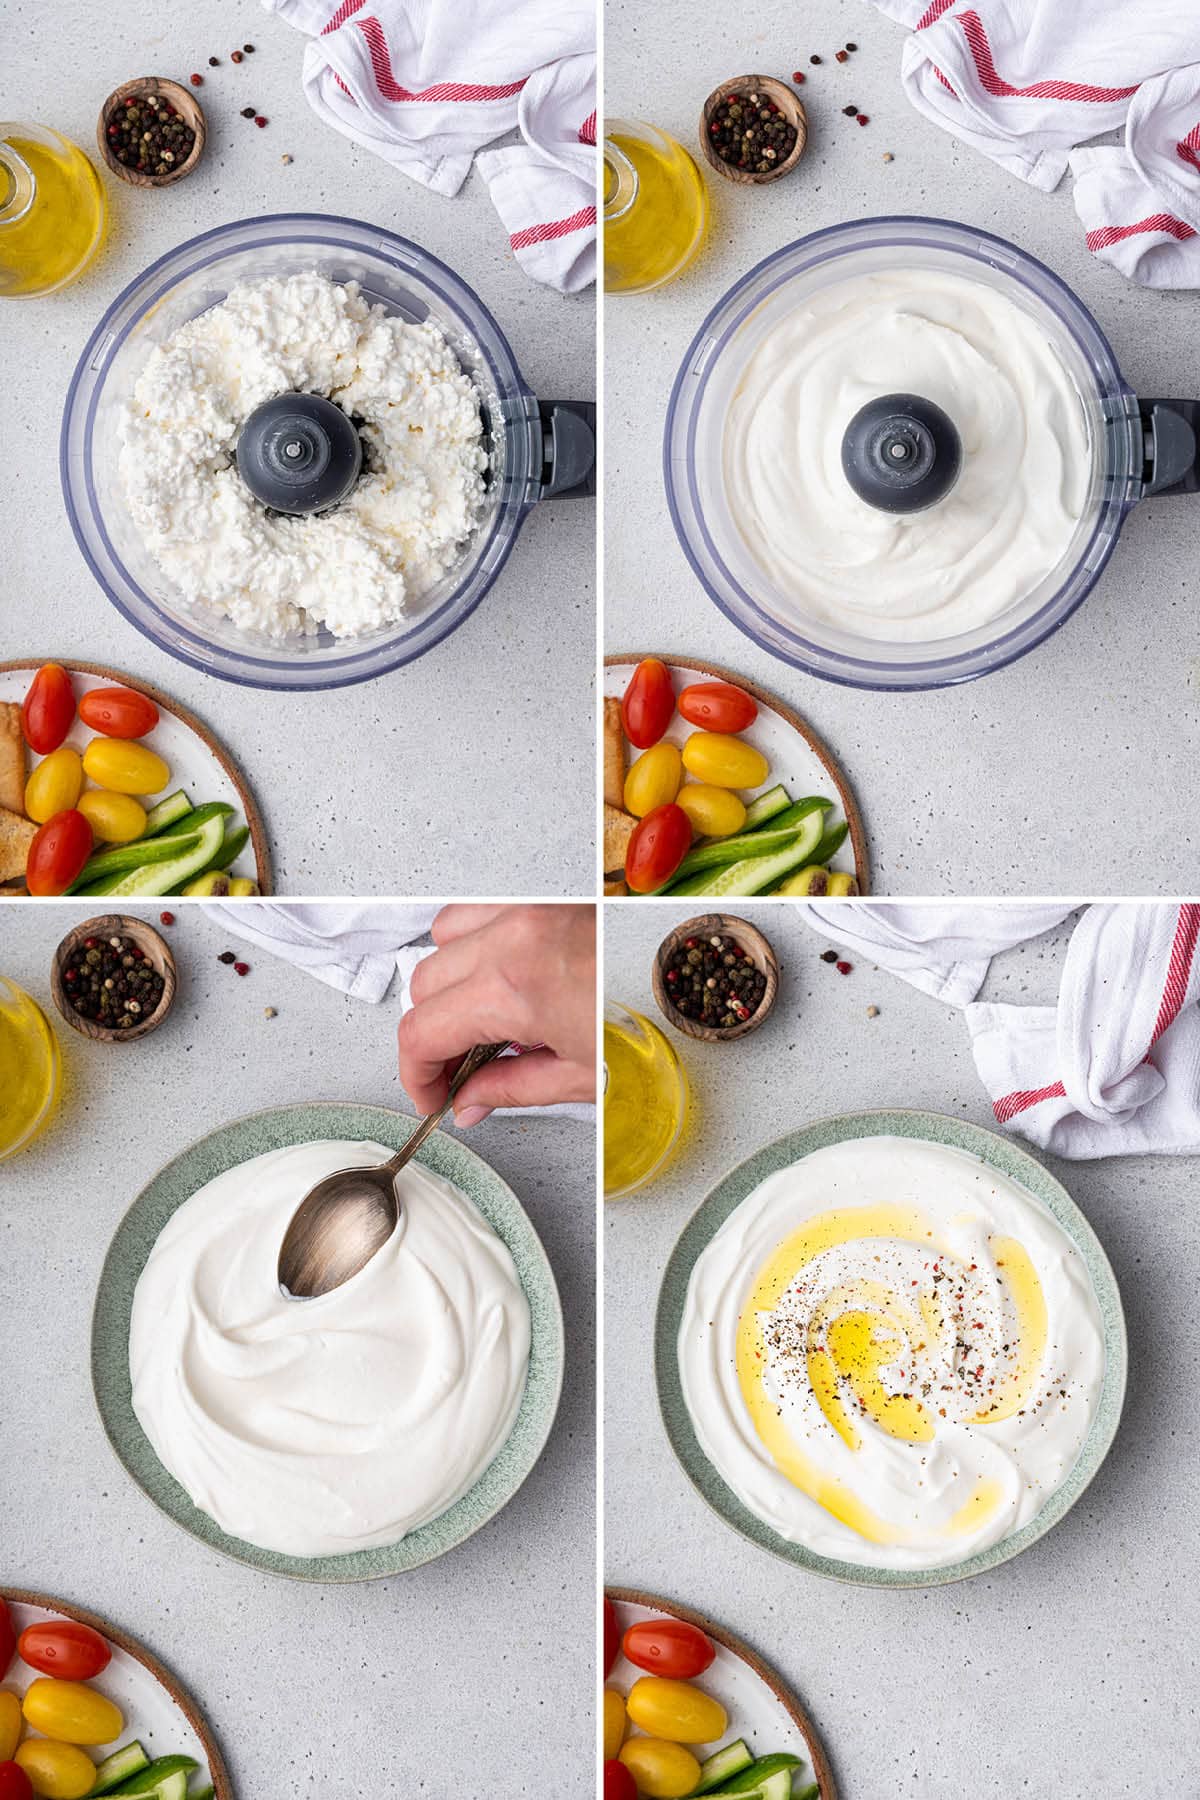 Collage of four photos showing the steps to make and serve Whipped Cottage Cheese: whipping the cottage cheese in a food processor, and adding to a bowl topped with red pepper and olive oil.